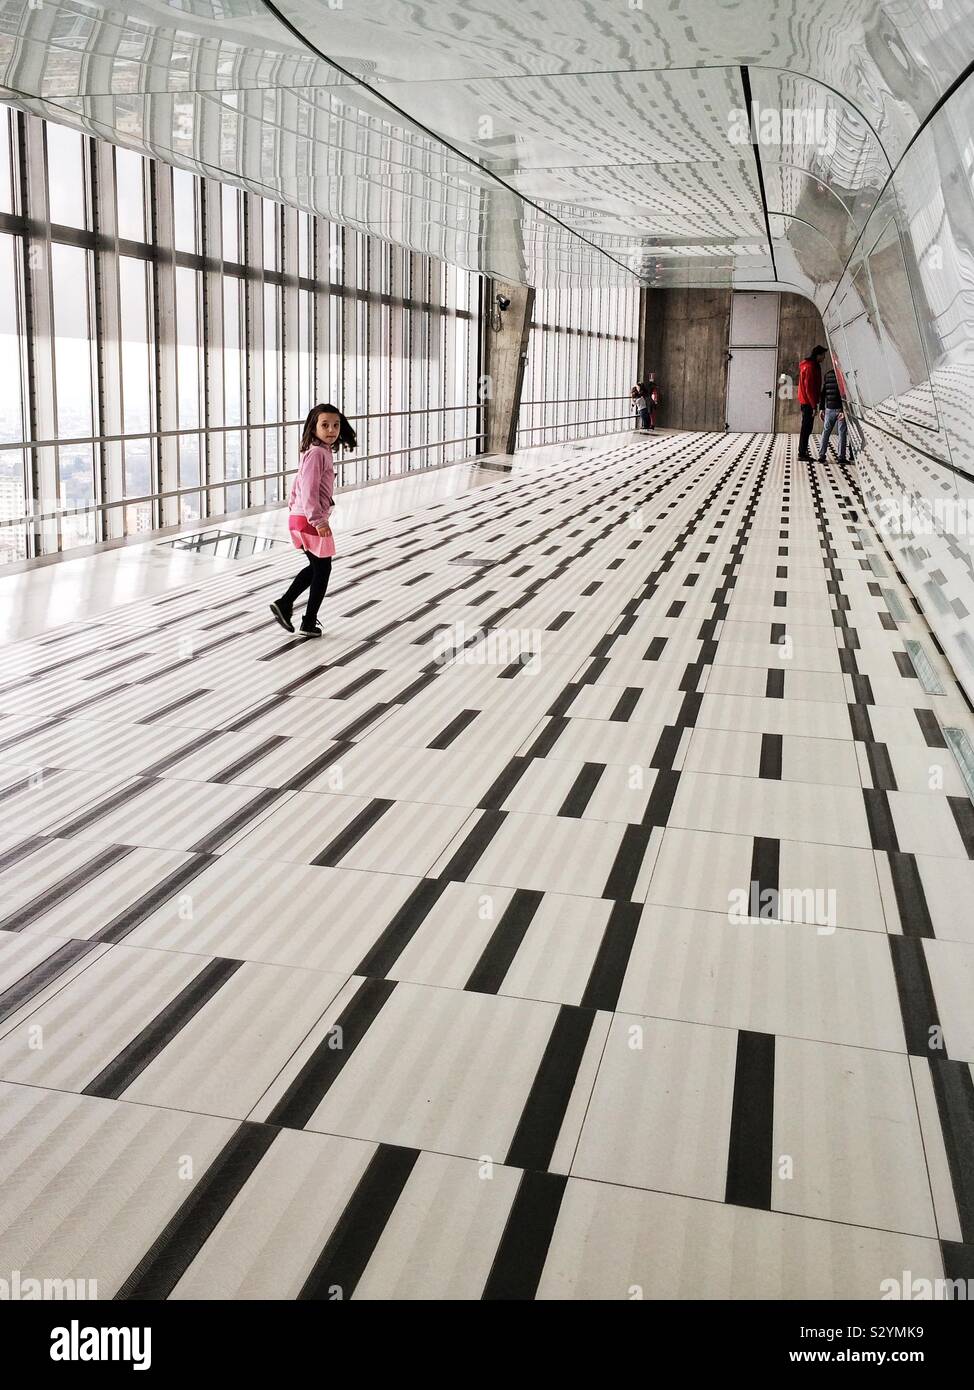 Girl wearing pink clothes runs along geometric-patterned floor in Milan’s high-rise Pirelli building Stock Photo